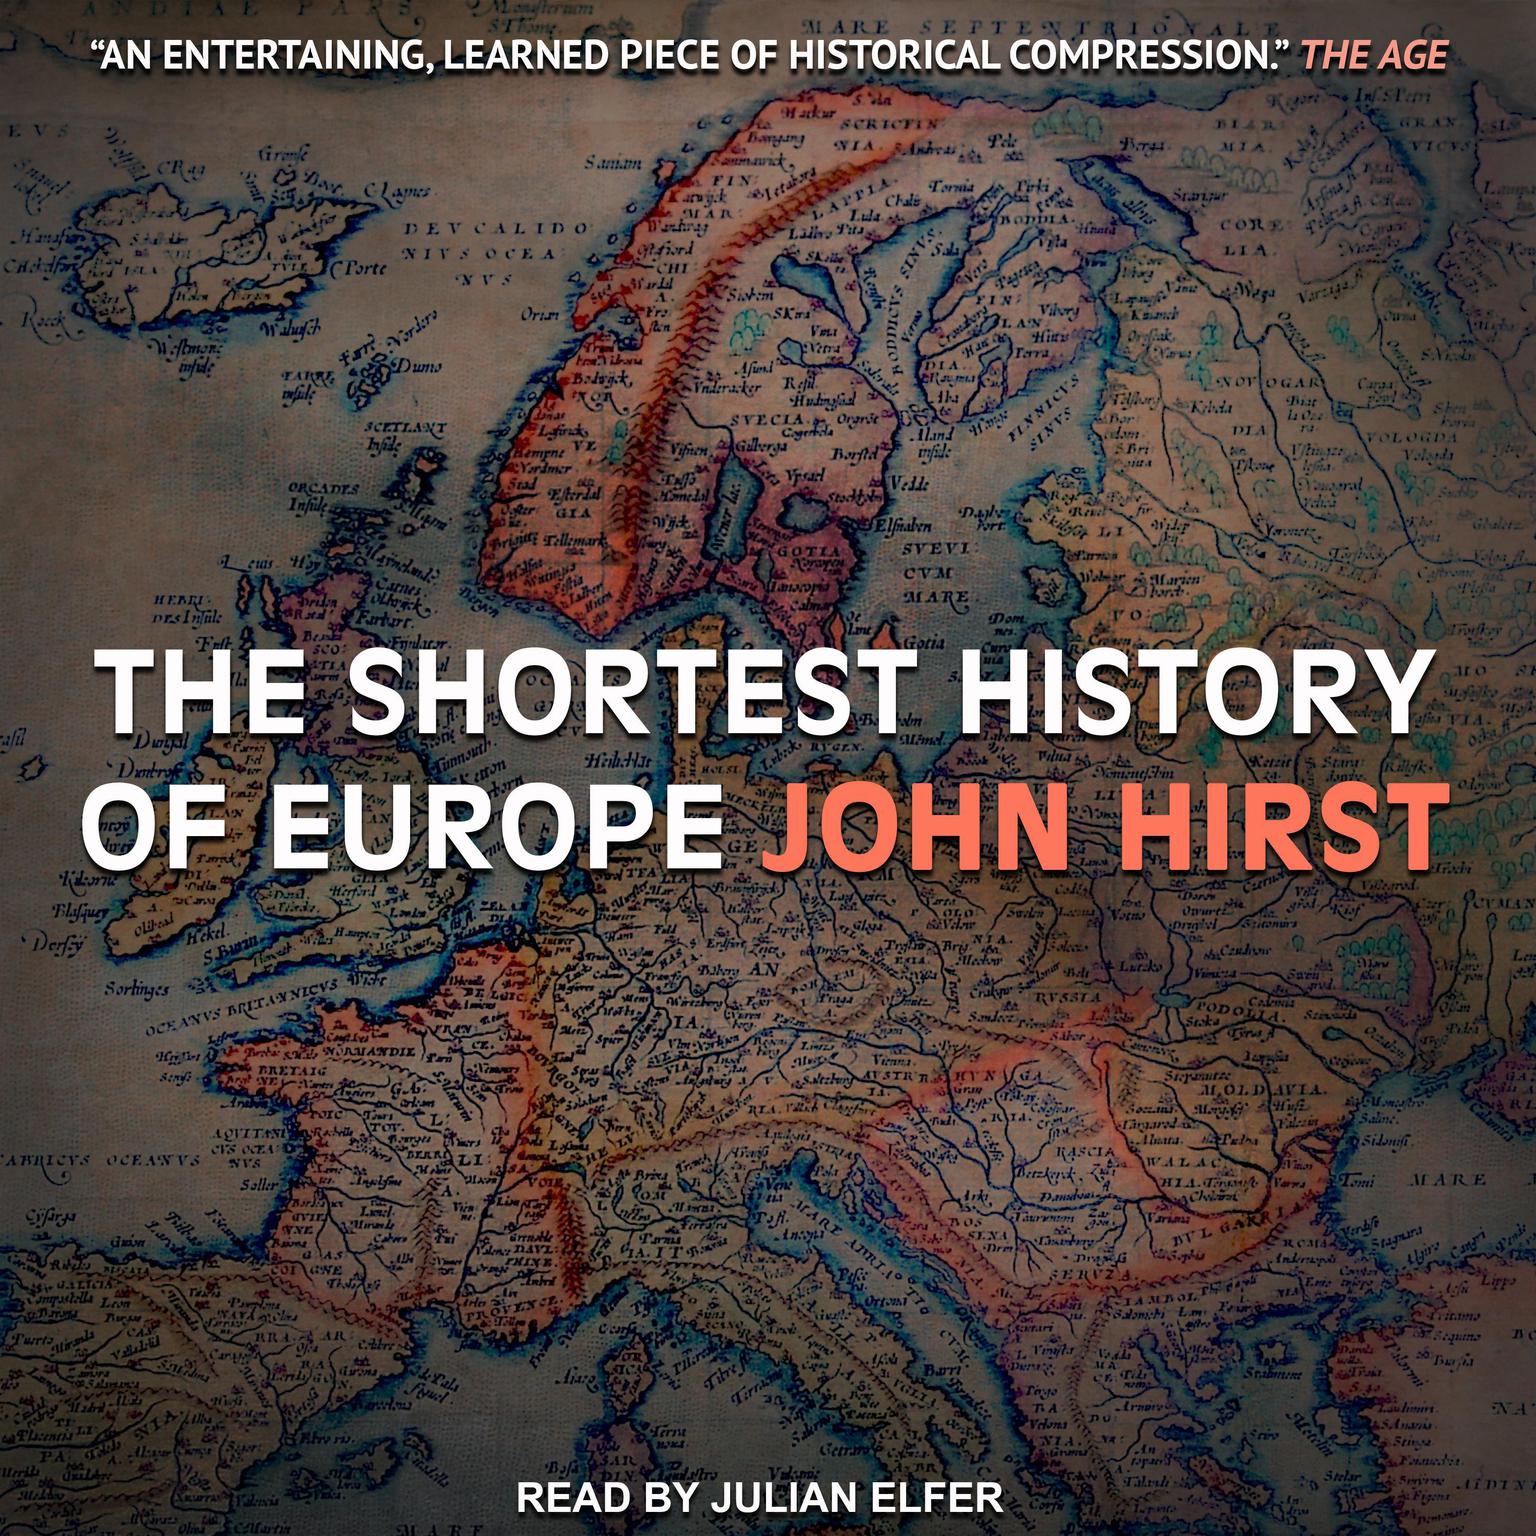 The Shortest History of Europe Audiobook, by John Hirst